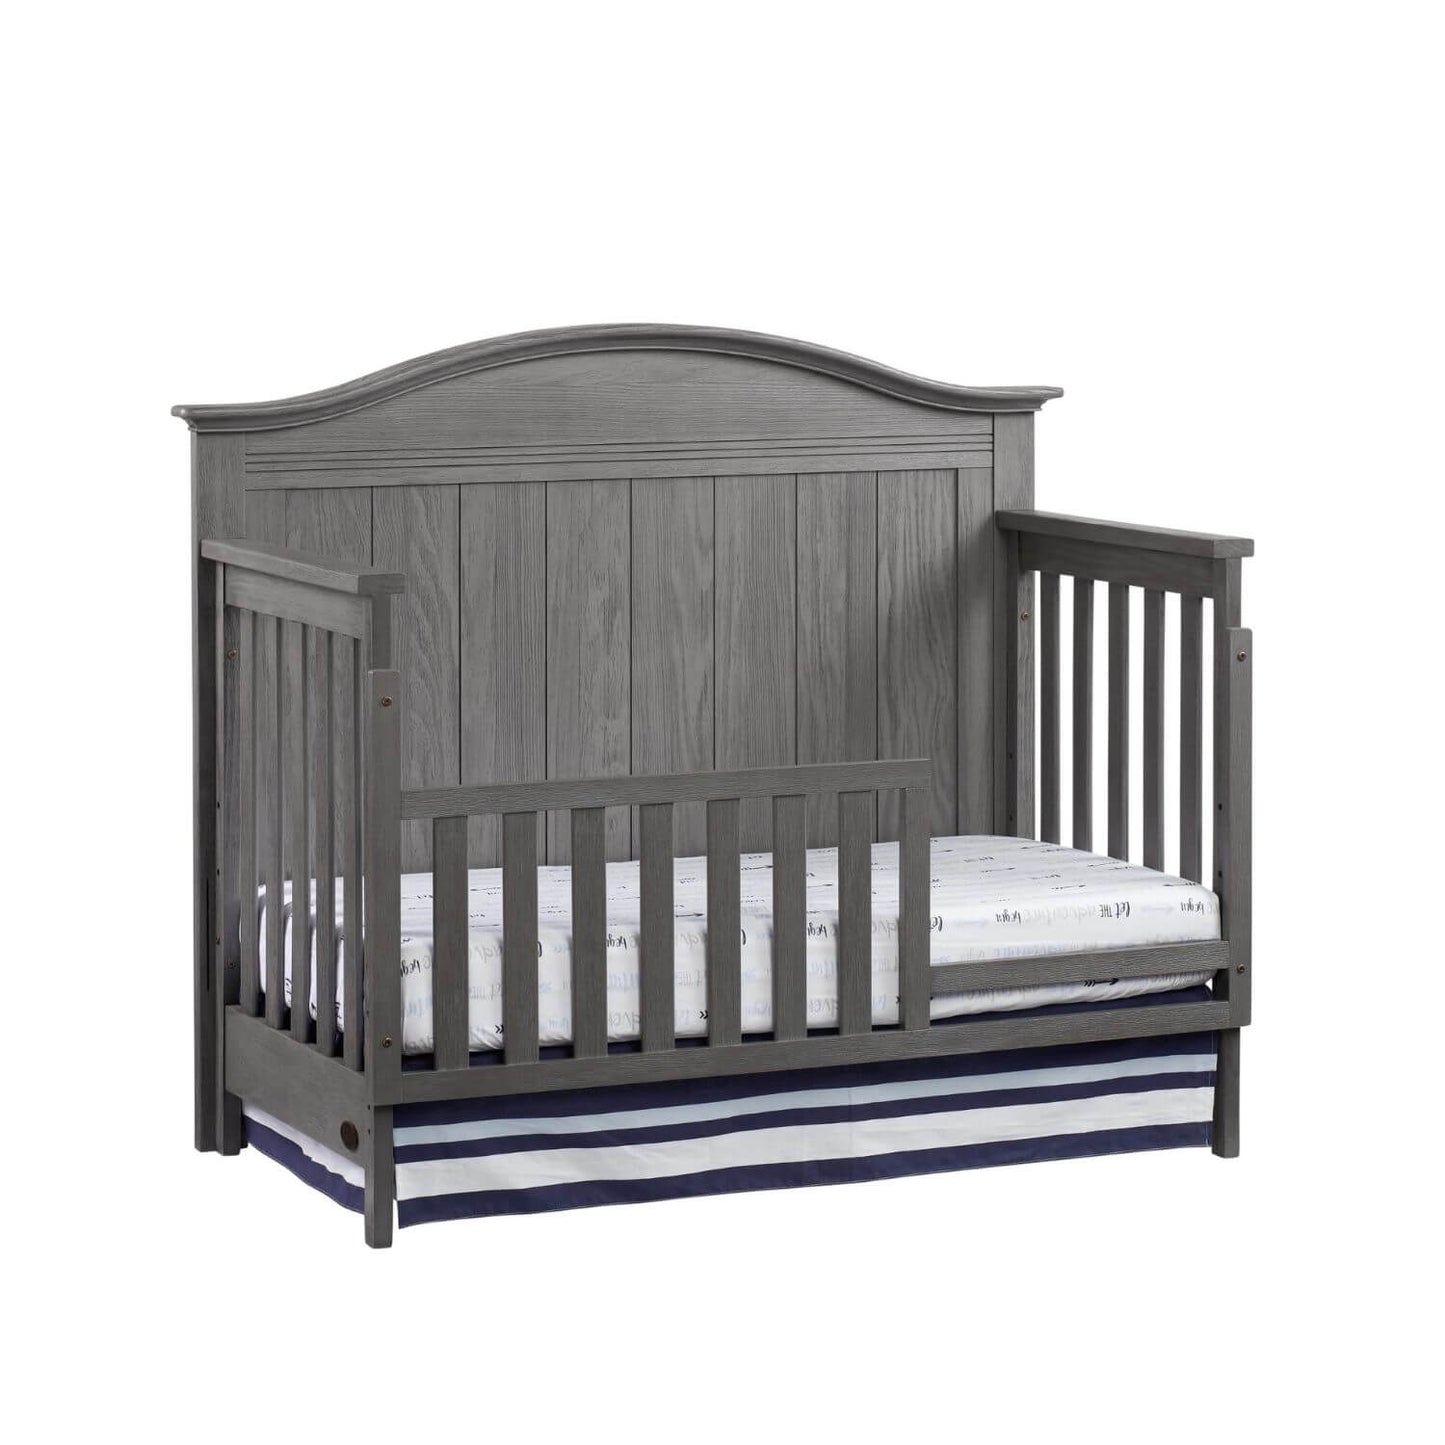 Soho Baby Chandler 4-in-1 Convertible Crib | Graphite Gray - Convert To a Toddler Bed